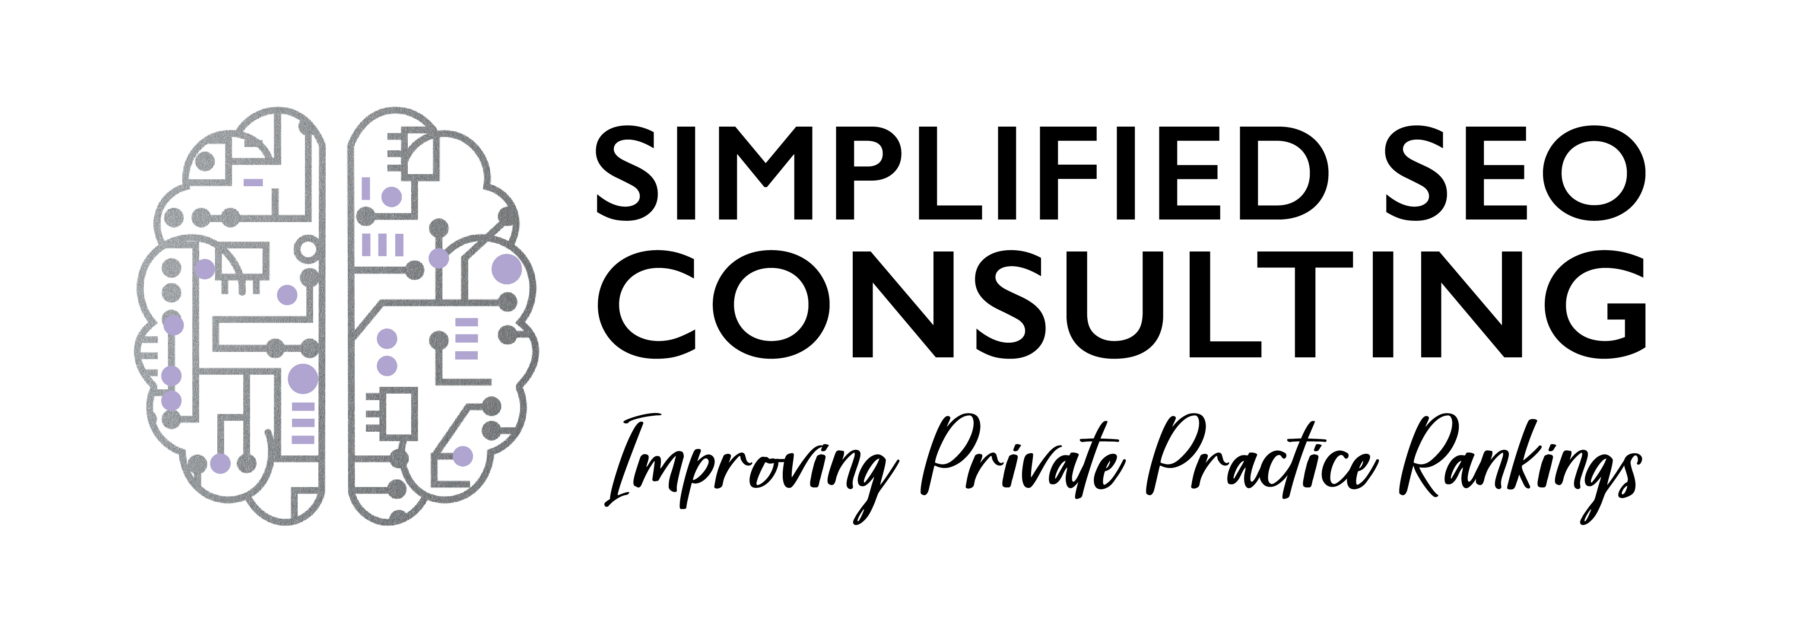 Simplified SEO Consulting